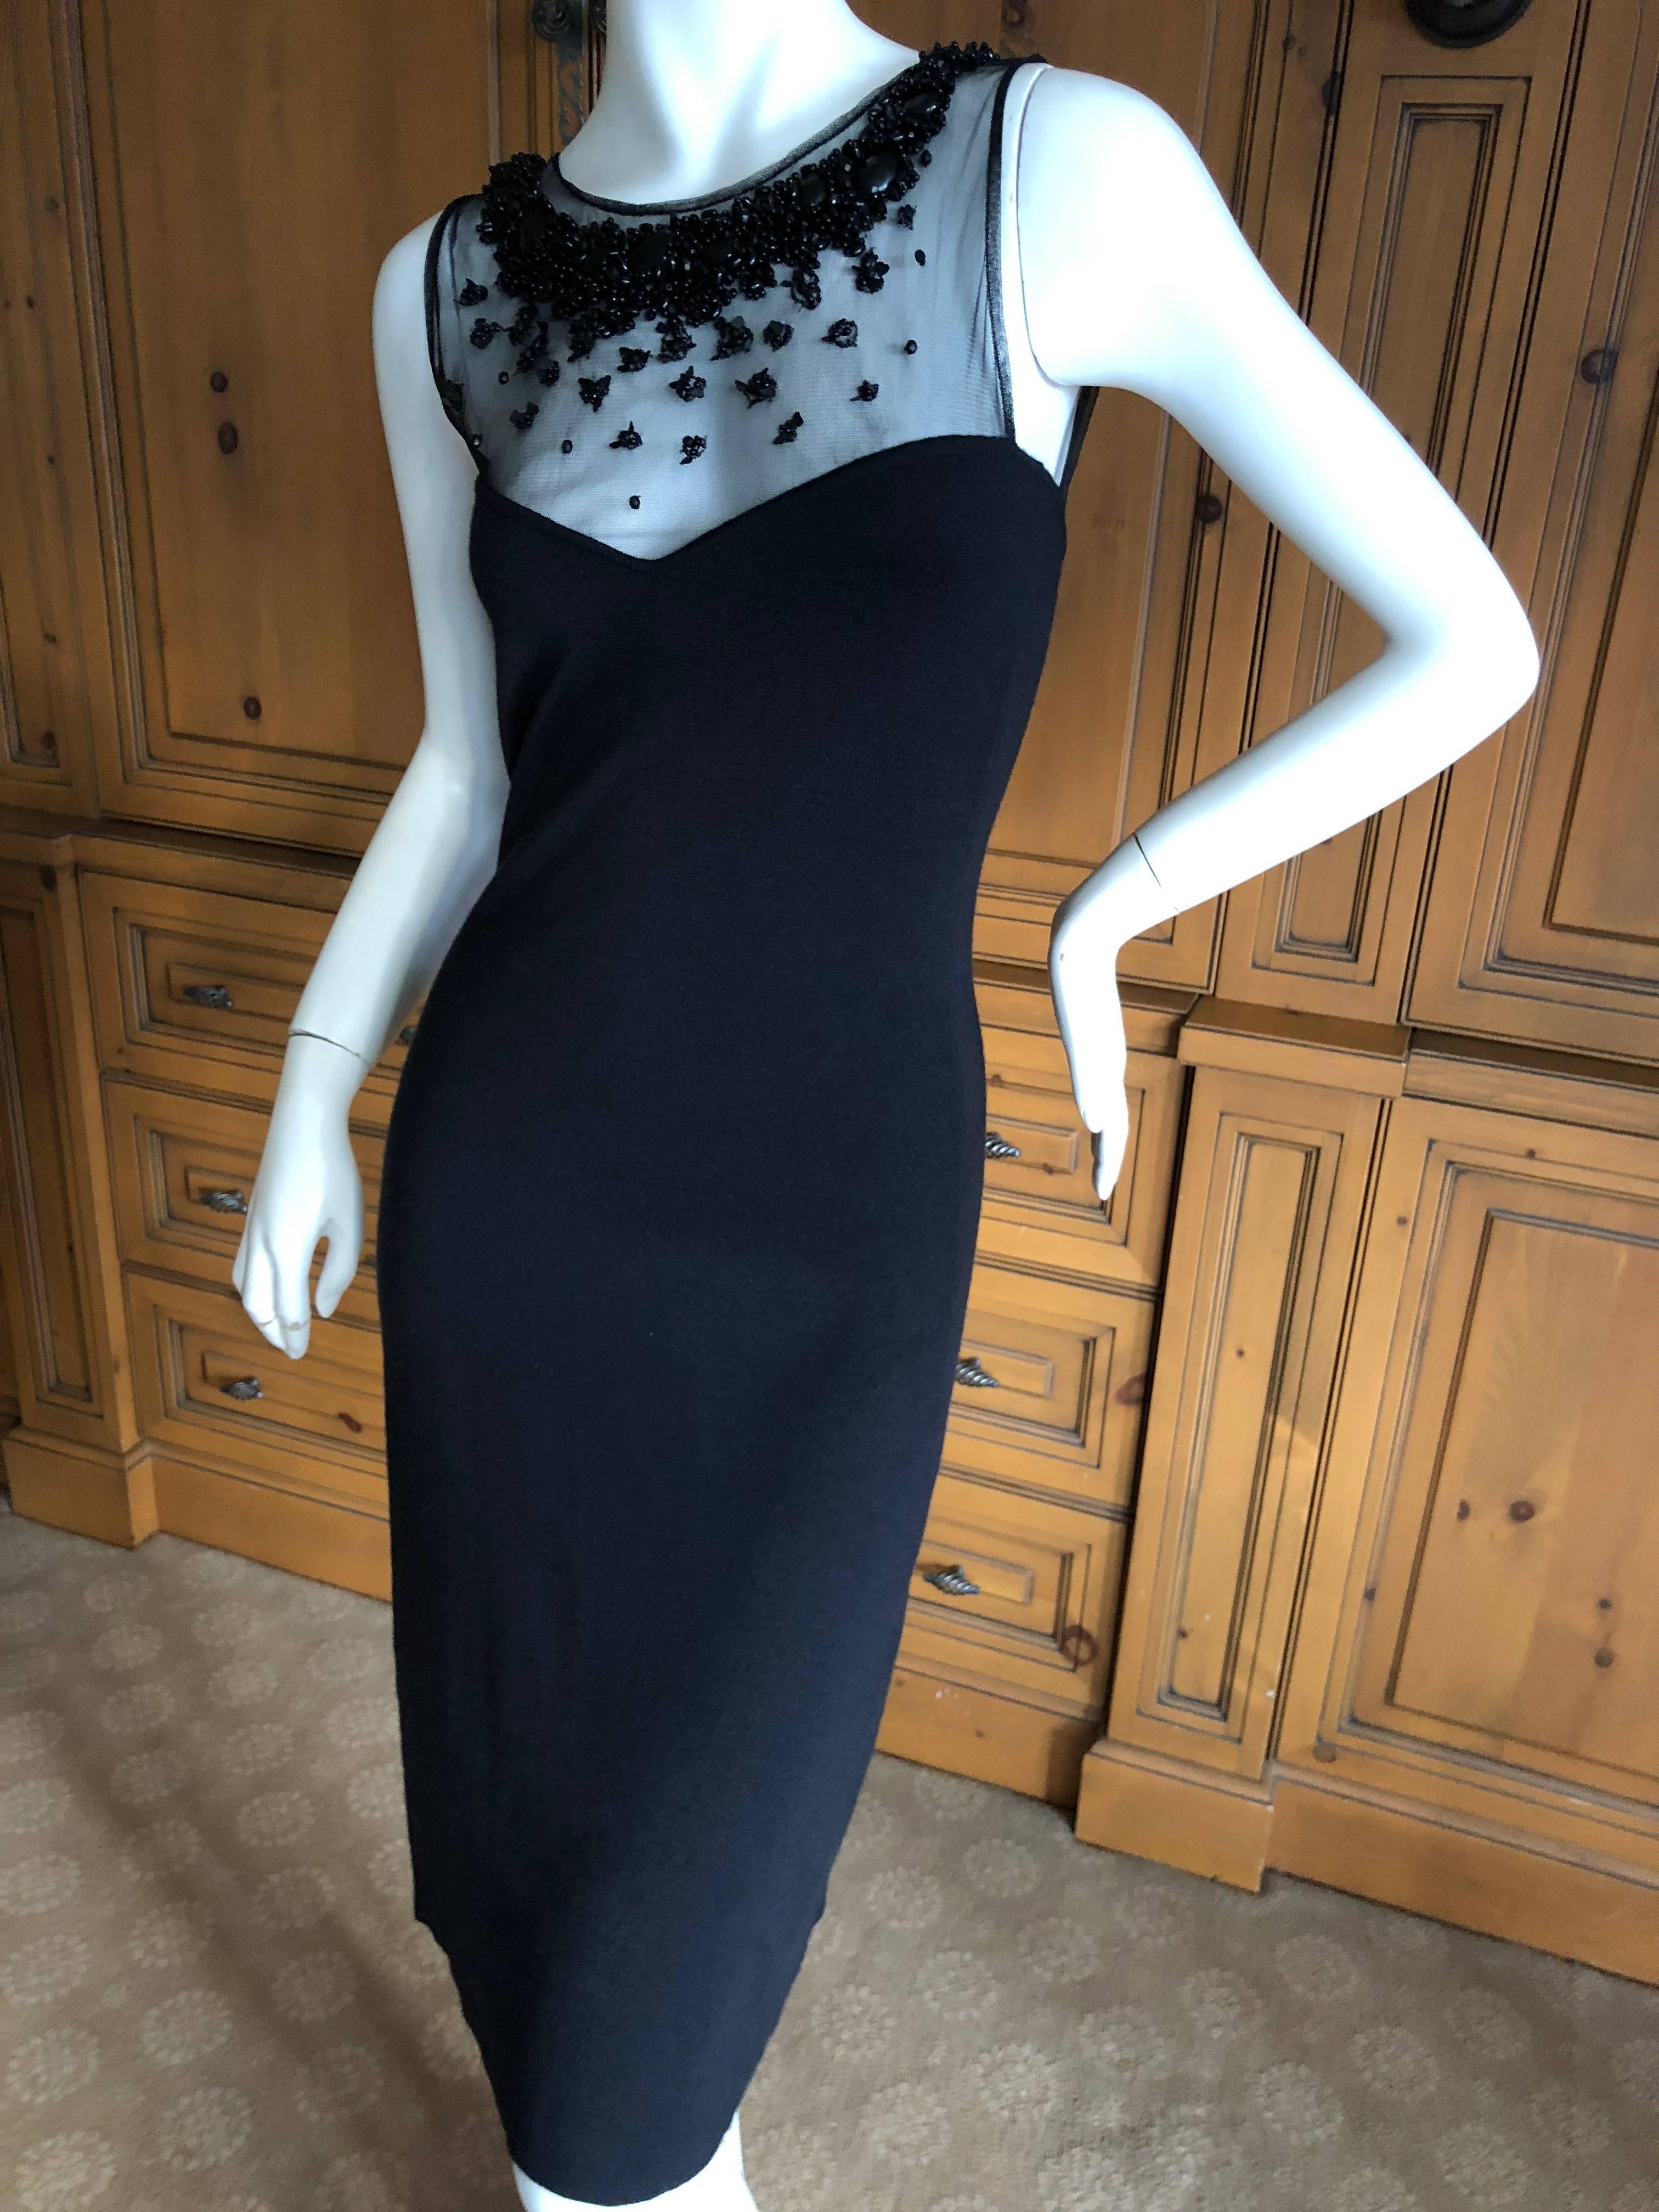 Christian Dior Classic Black Cashmere Cocktail Dress w Jeweled Collar by Lesage For Sale 3